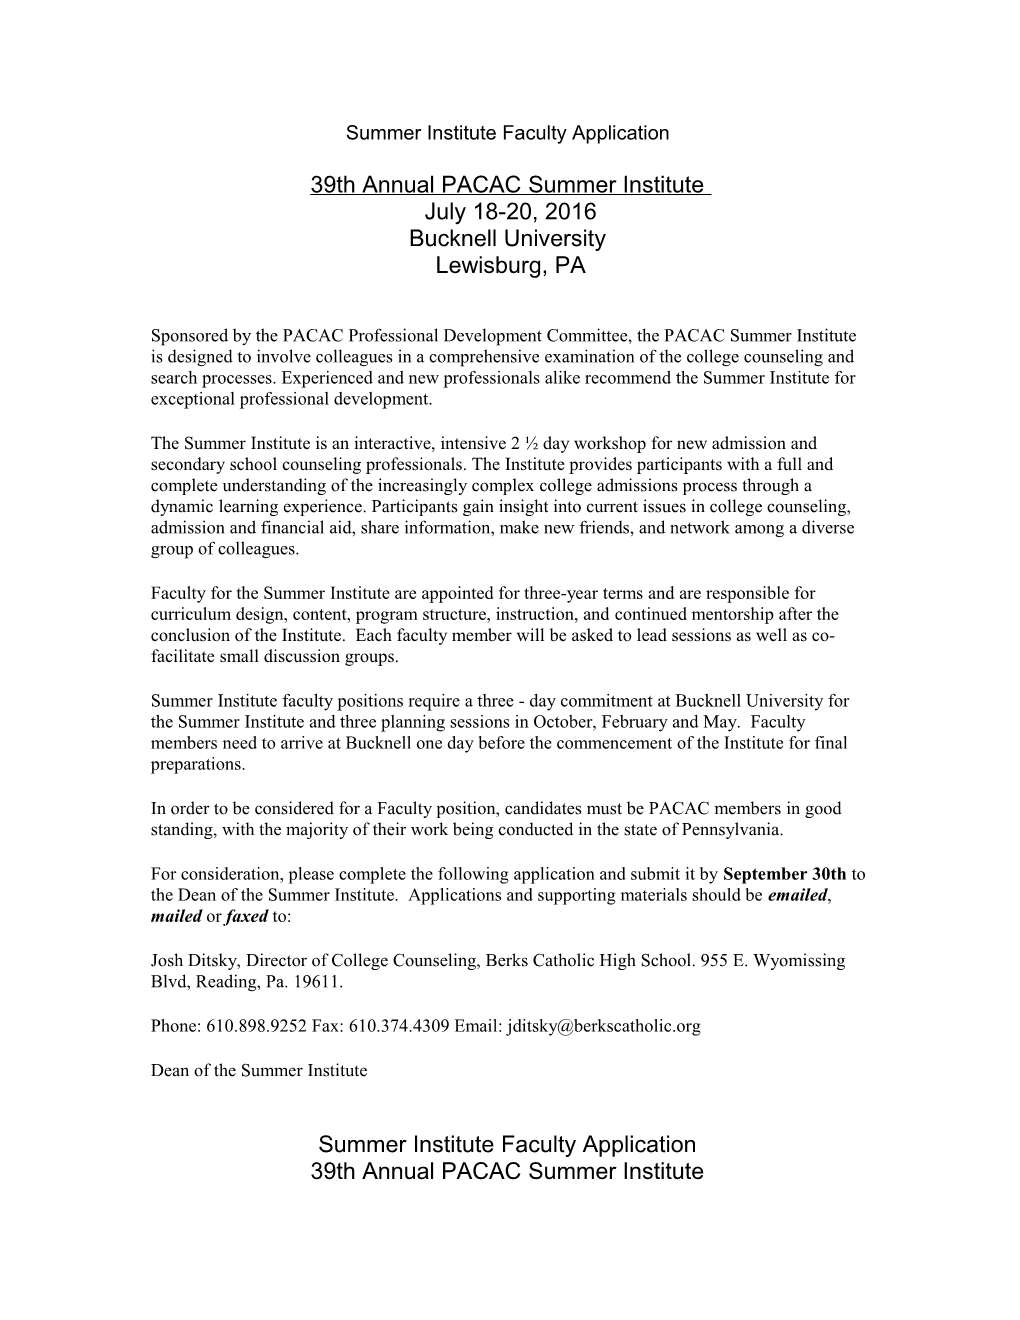 Application for PACAC Summer Institute Program Faculty - 2007